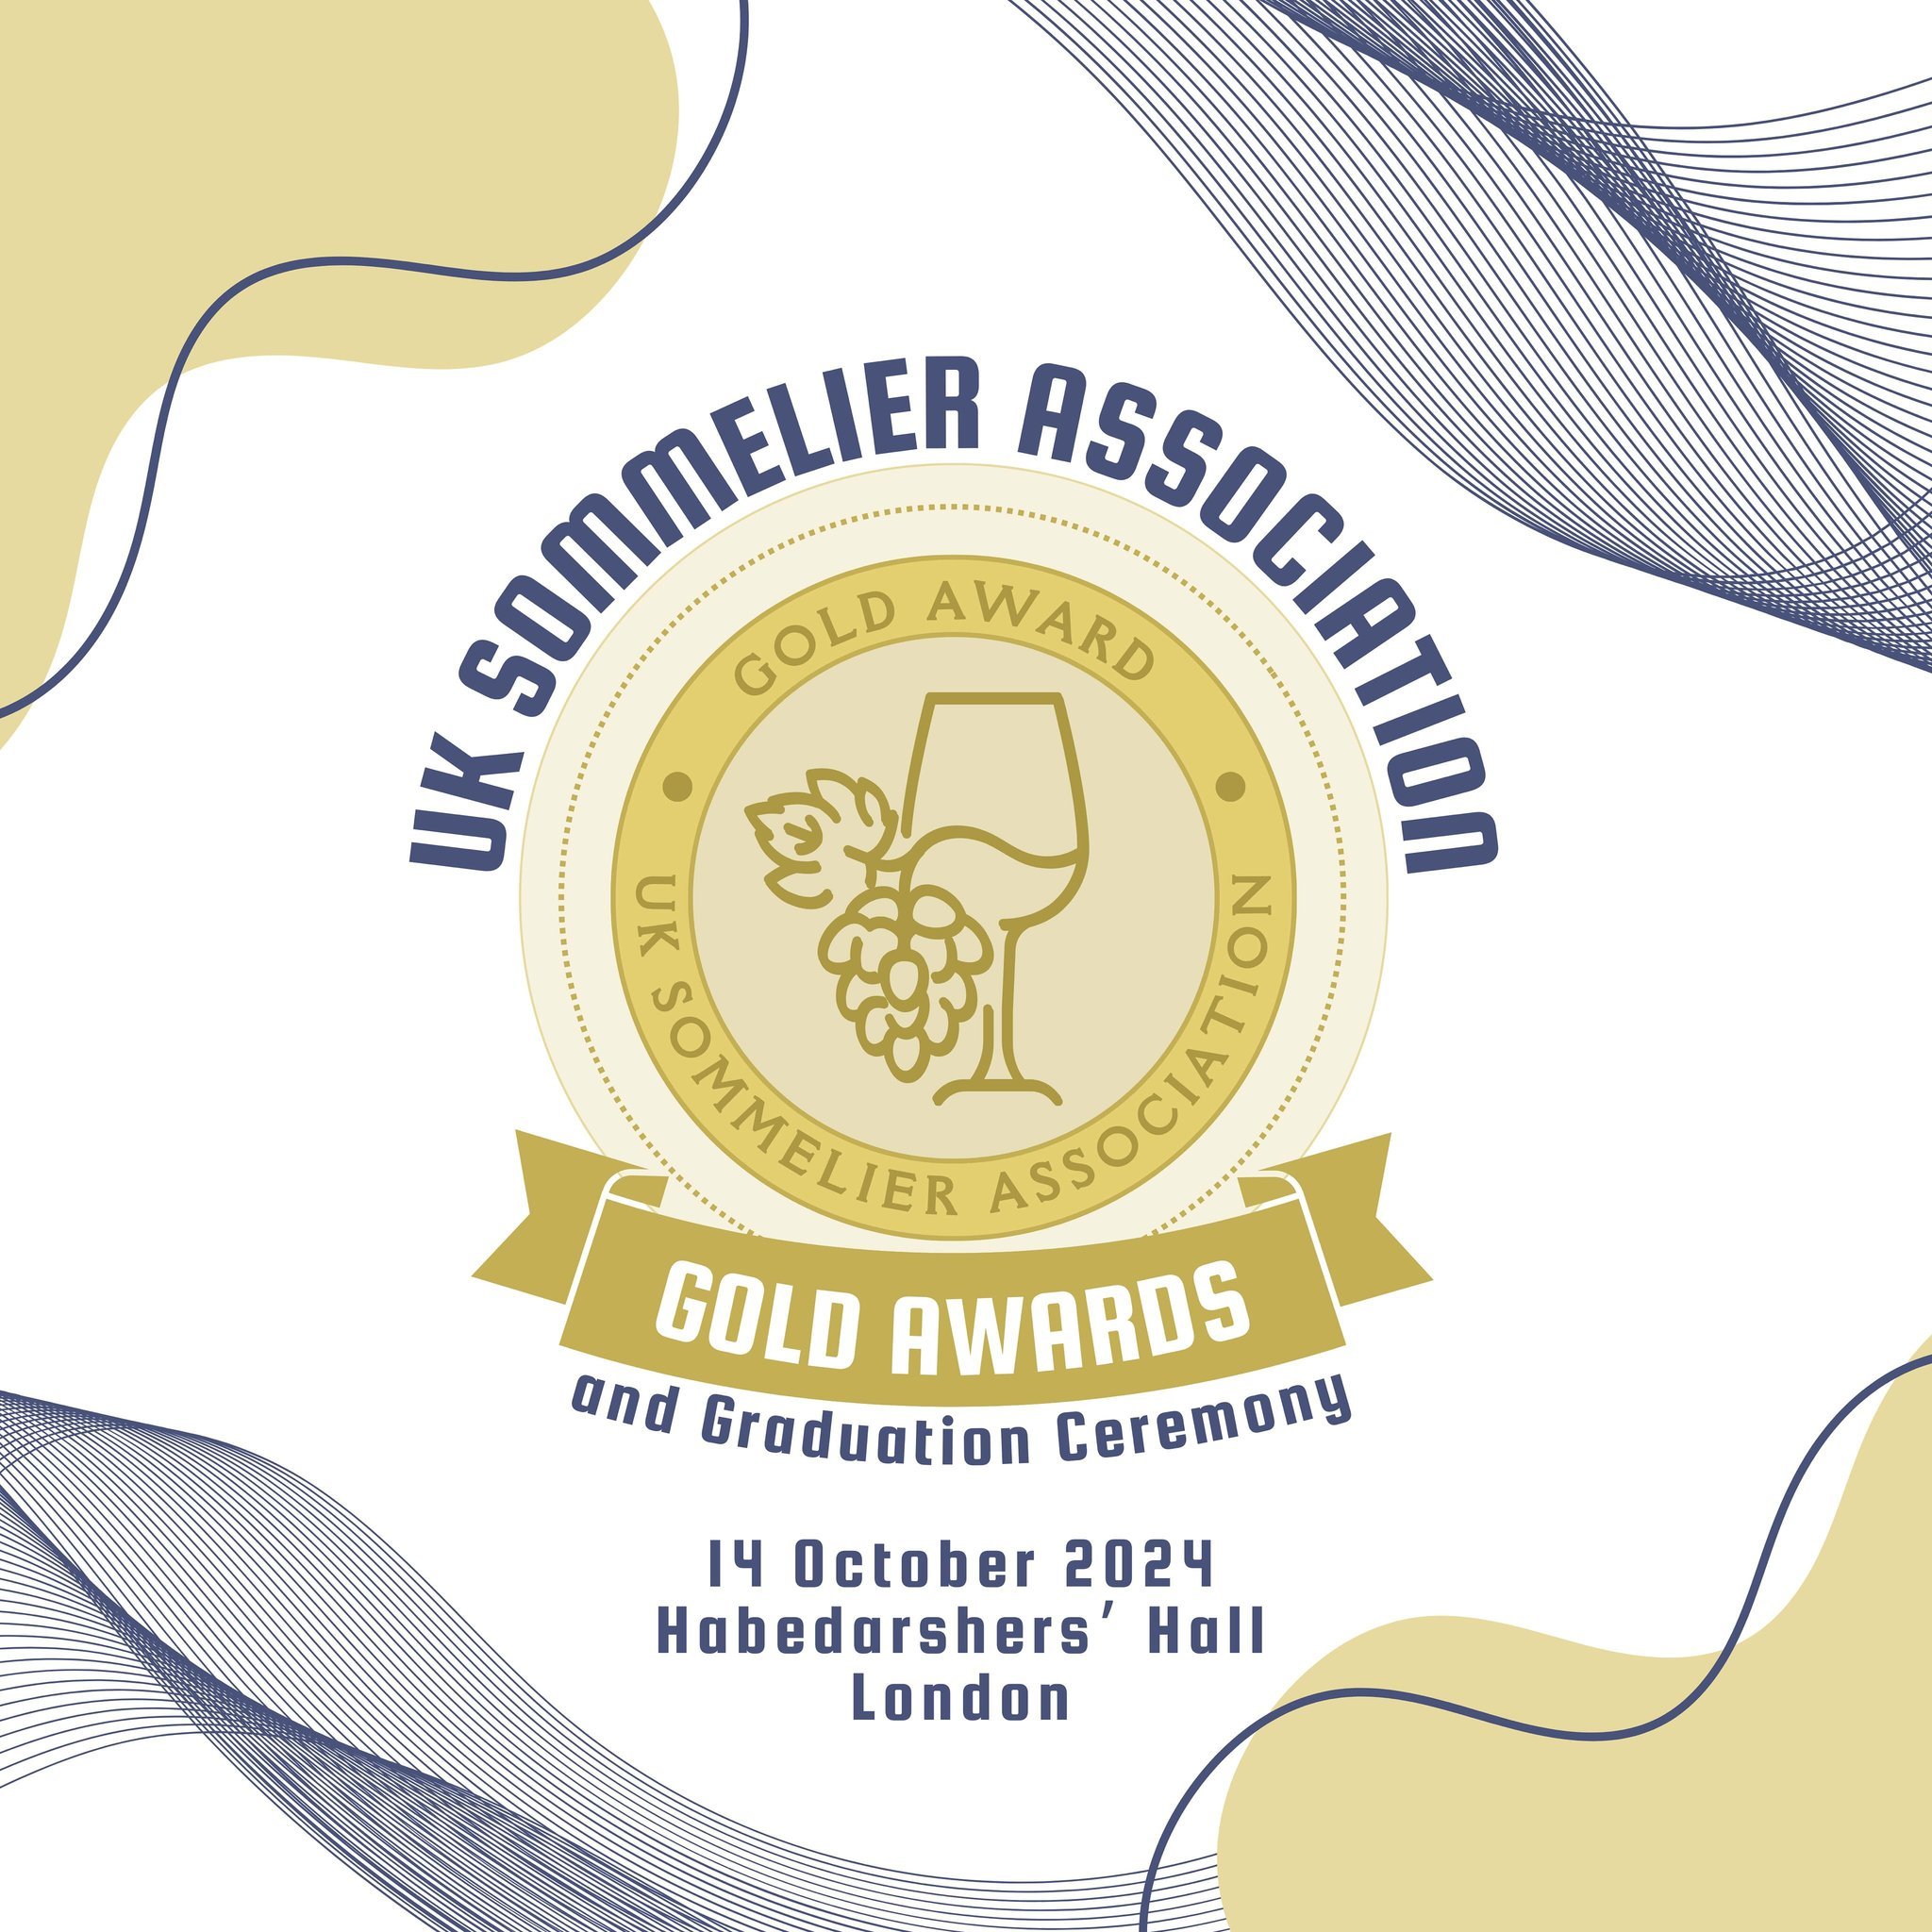 We are thrilled to announce the UK Sommelier Association GOLD AWARDS!
Join us on the 14th of October for a prestigious evening as we launch the inaugural GOLD AWARDS Ceremony, honoring top sommeliers and wine experts.

You have a very important role 